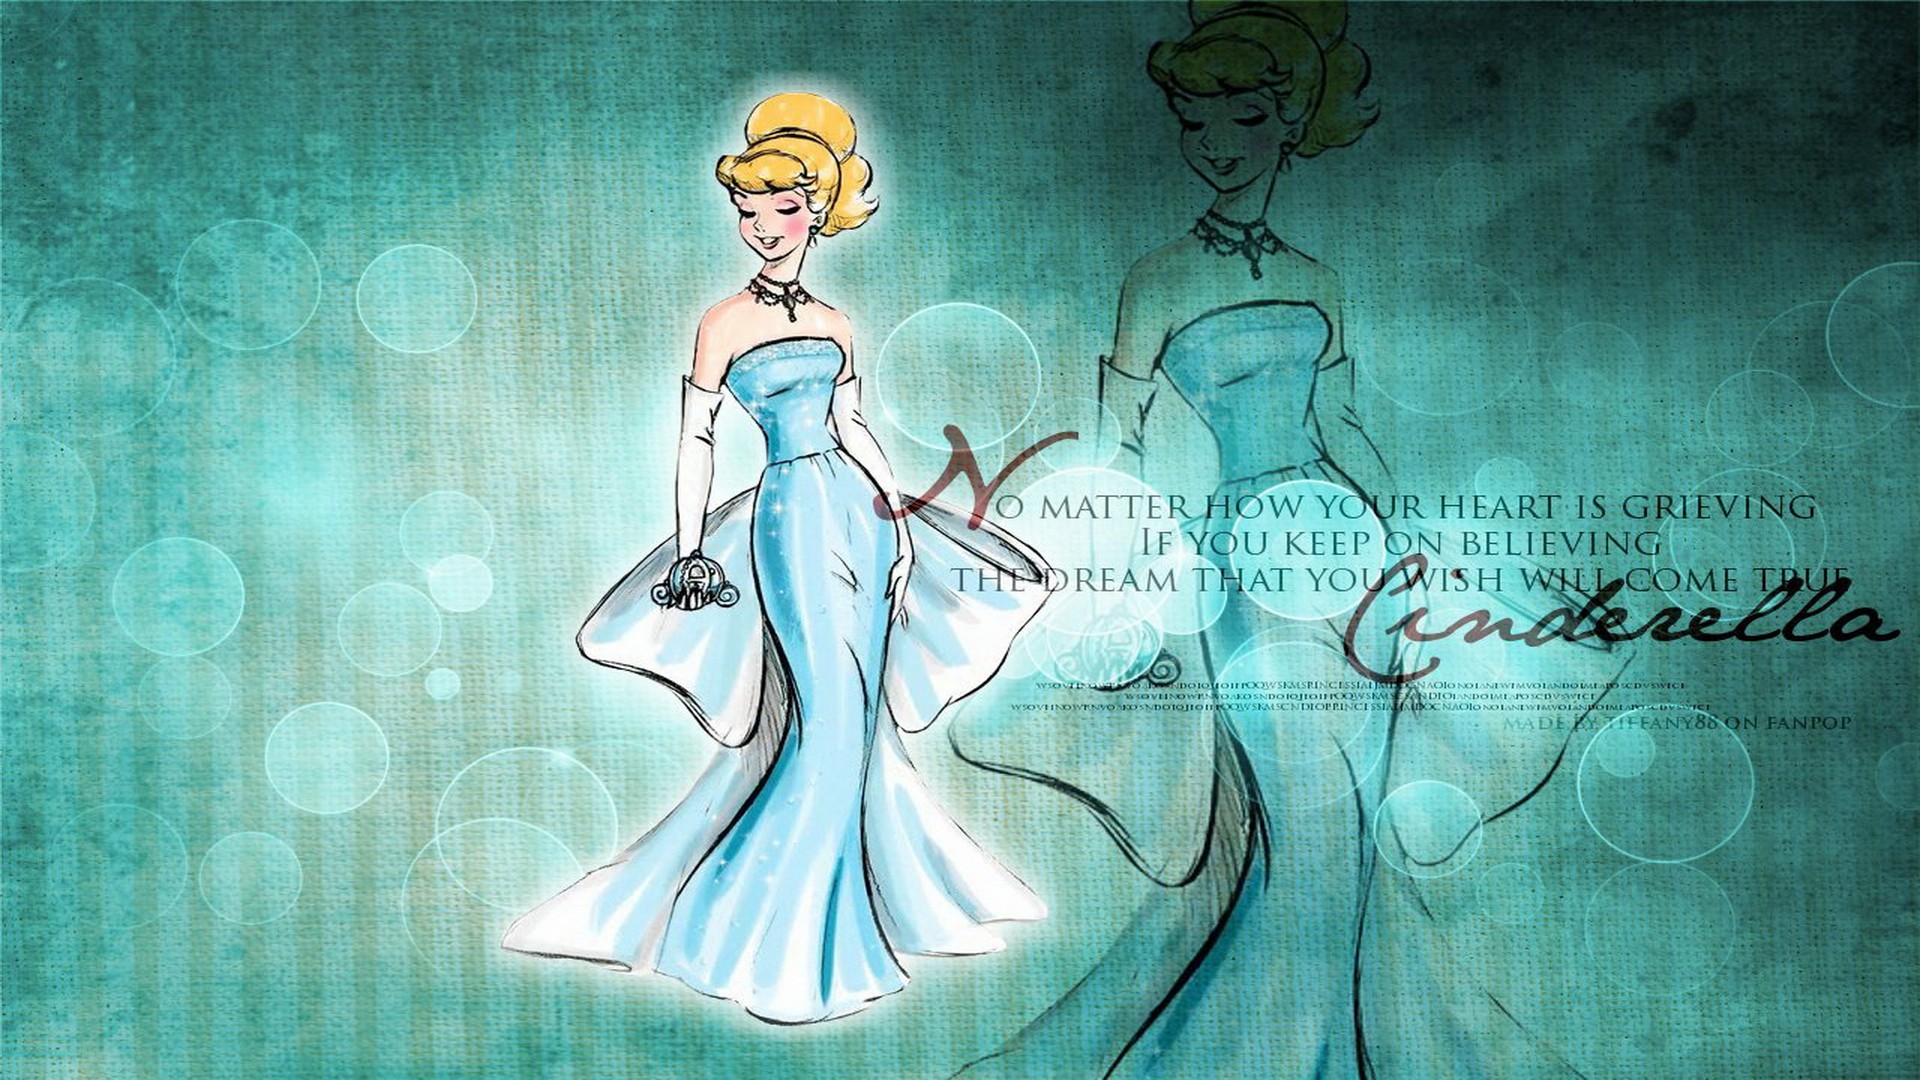 Disney Cinderella HD big wallpapers with beautiful pictures  YouLoveItcom